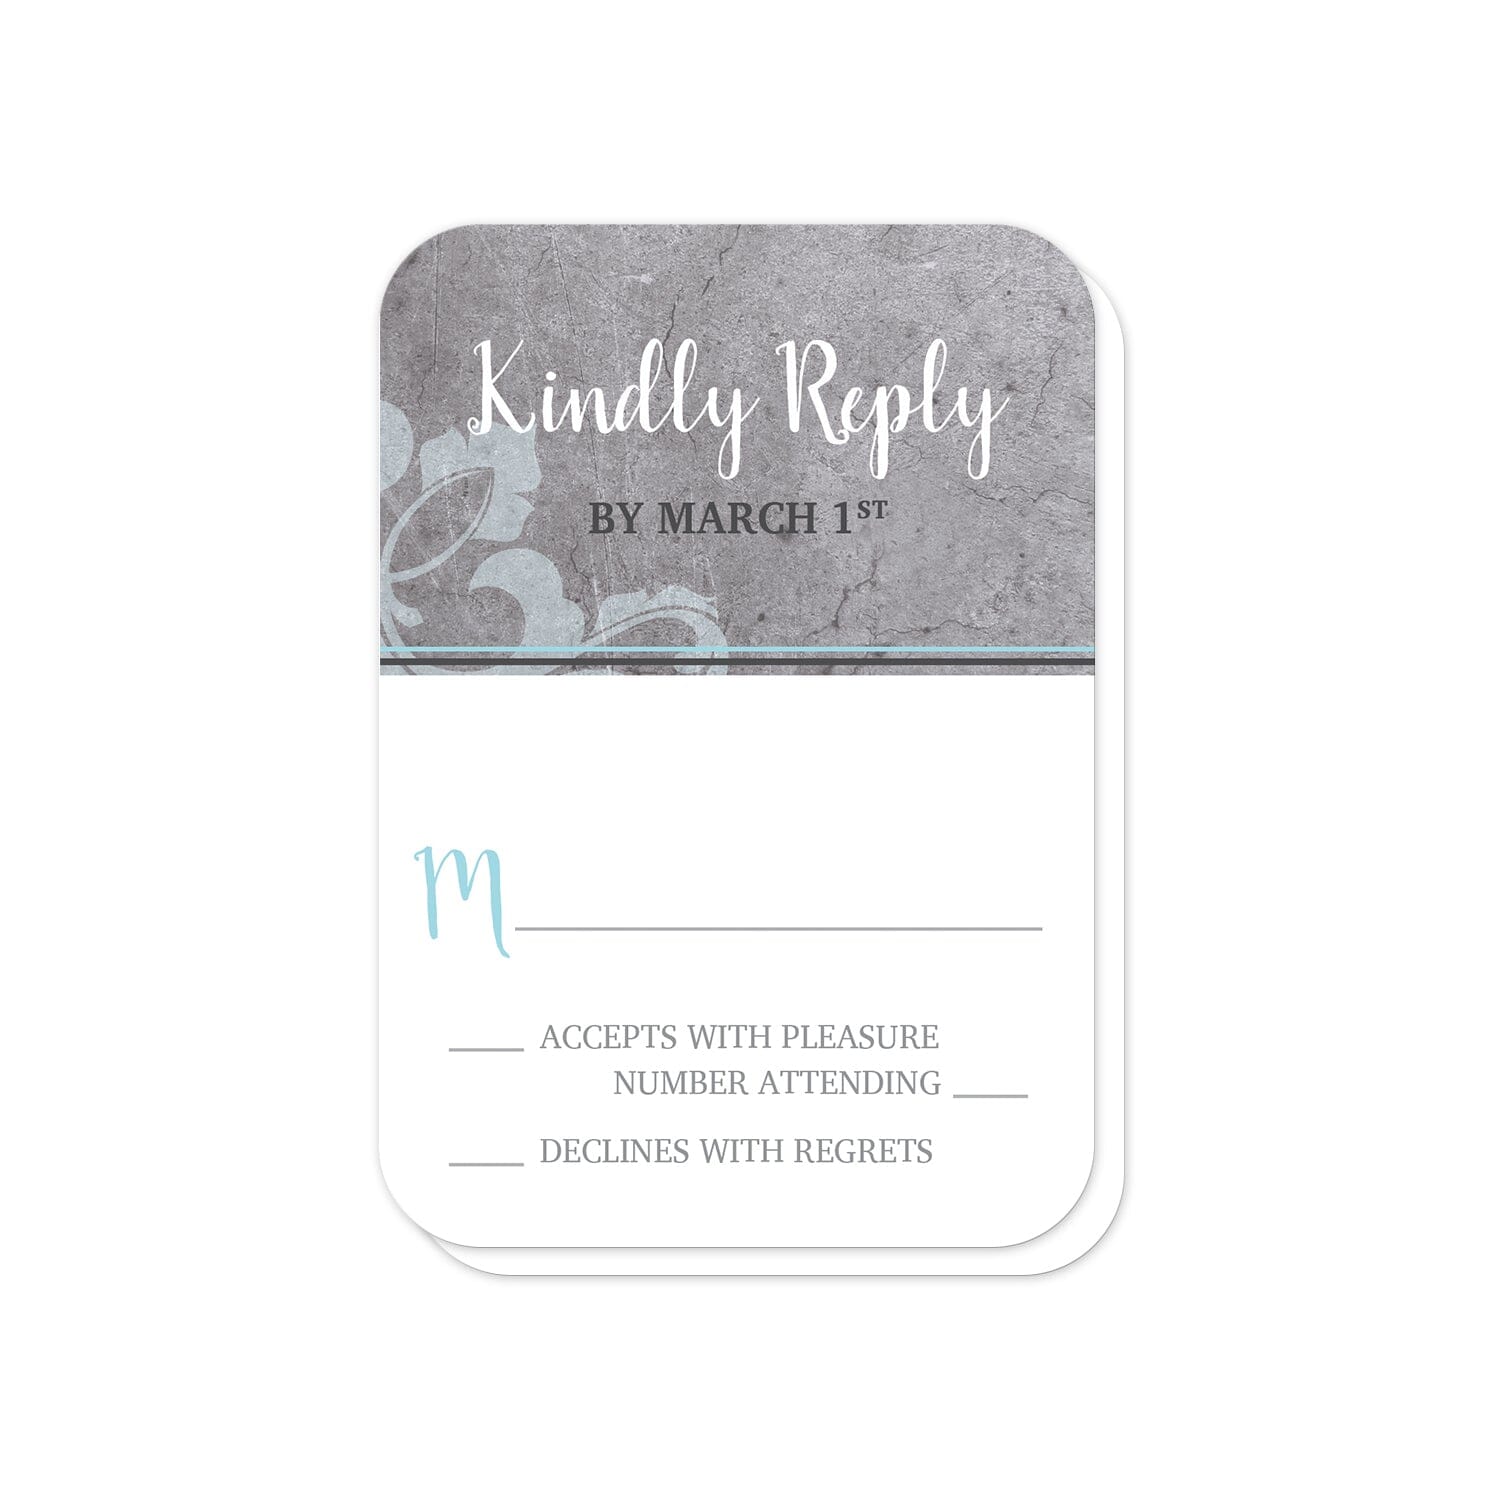 Industrial Aqua Gray Flourish RSVP Cards (with rounded corners) at Artistically Invited.